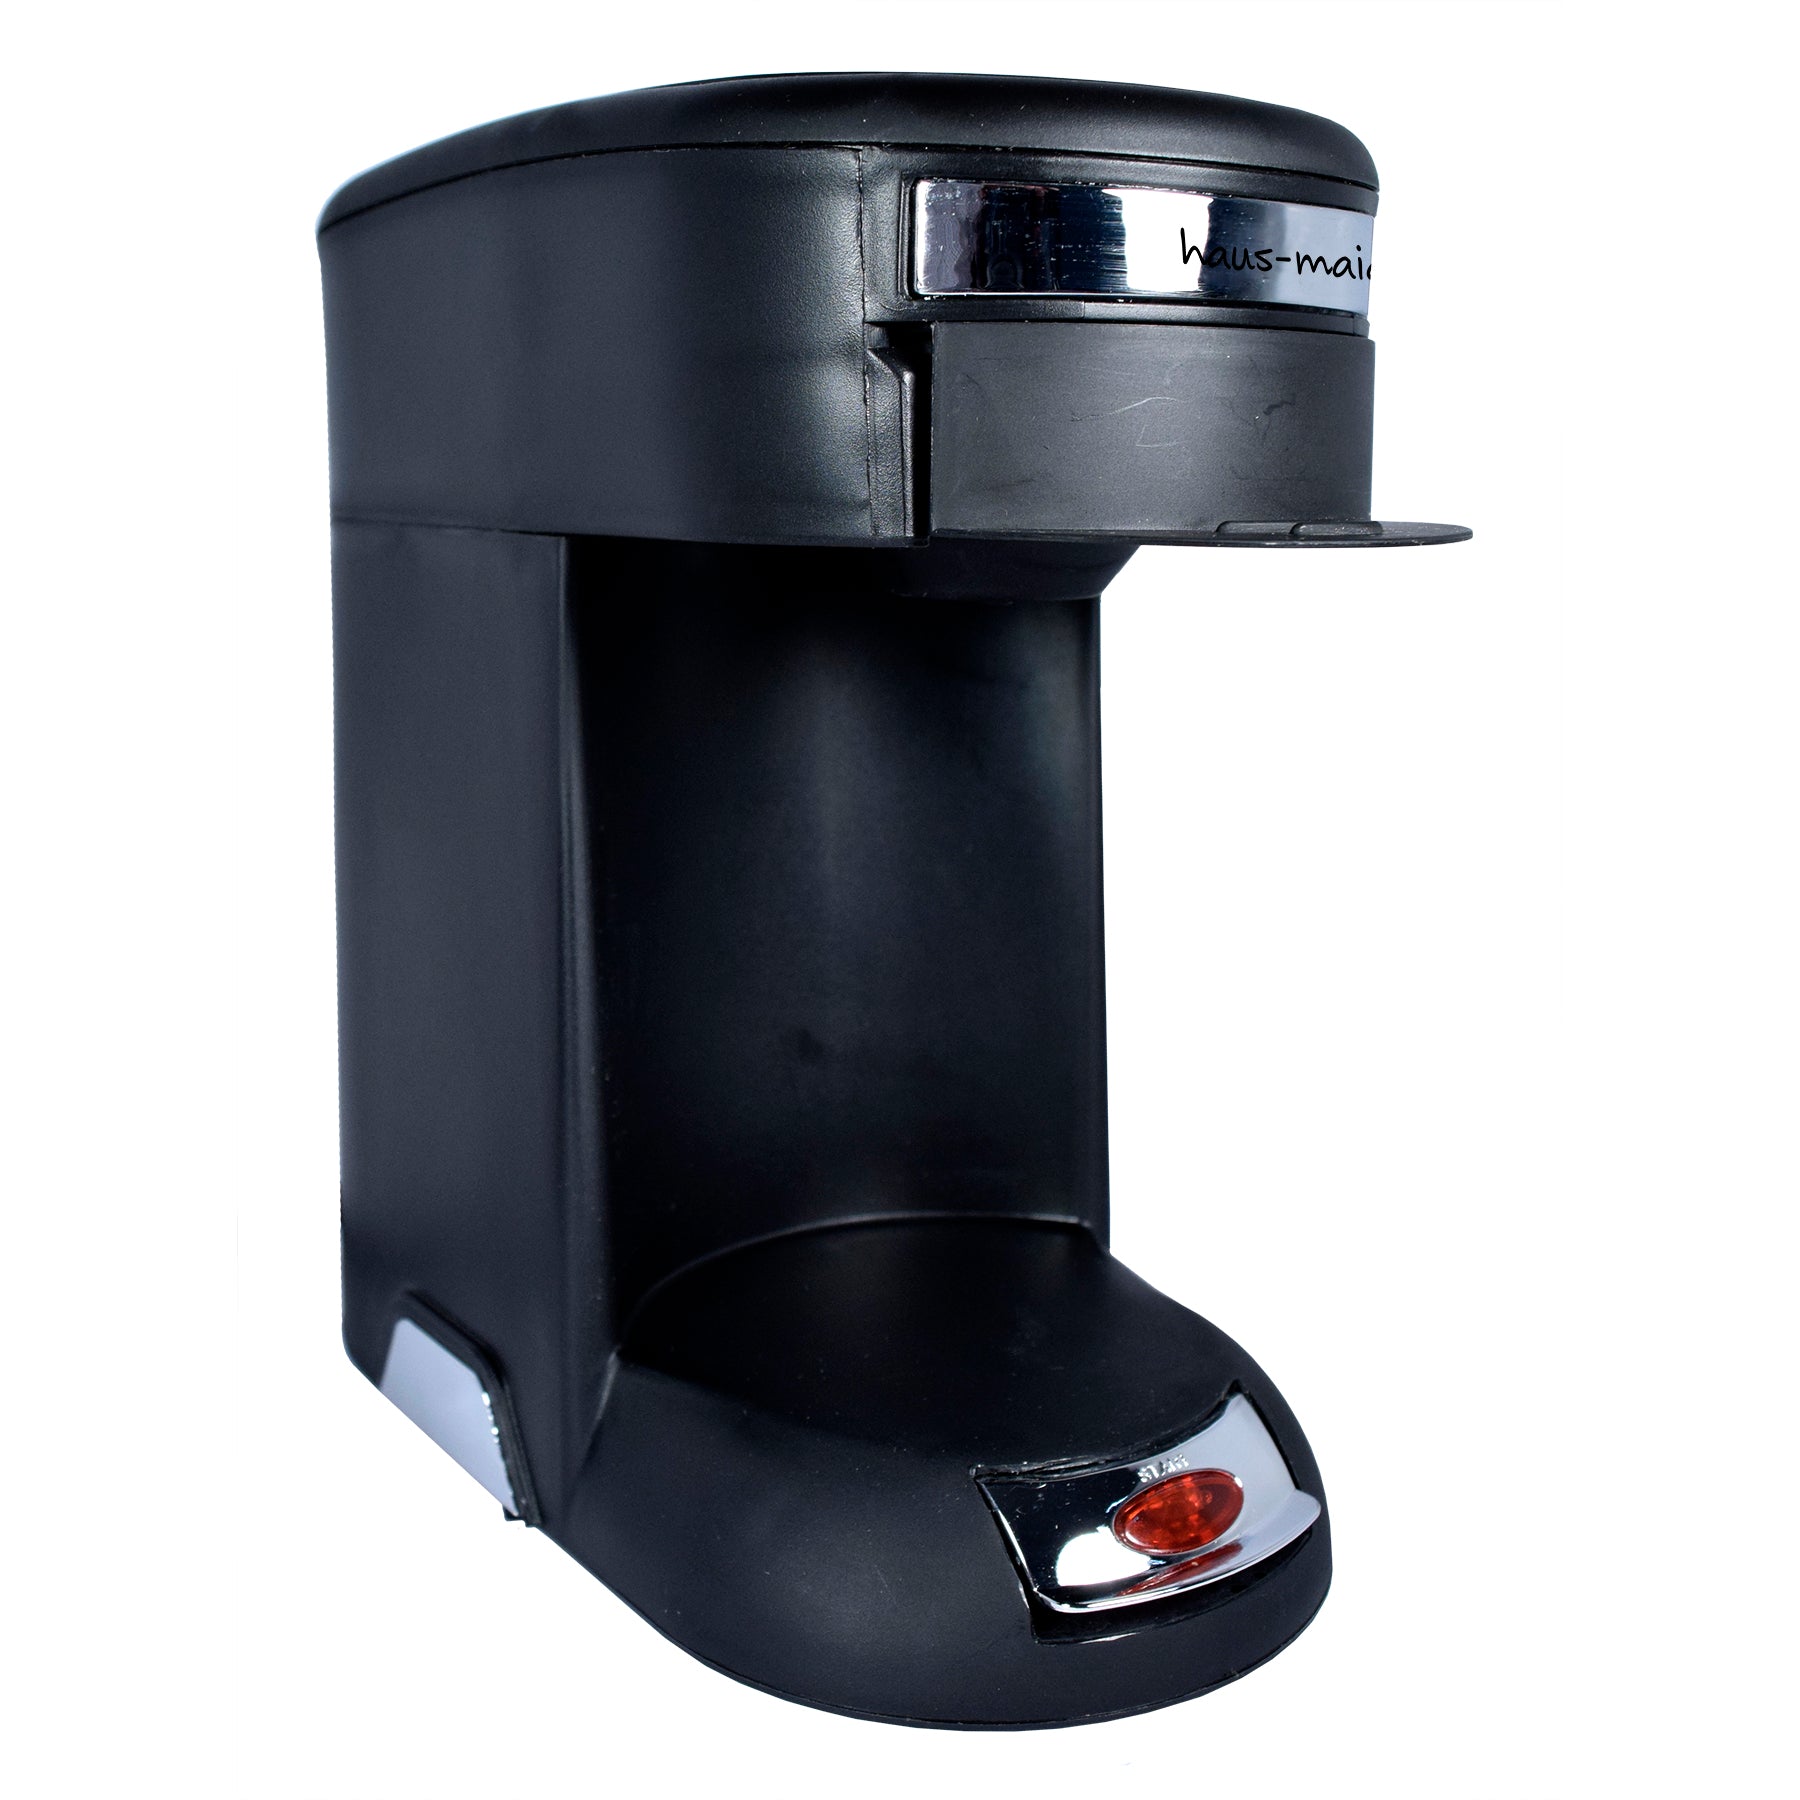 LodgMate Commercial 1-Cup Coffee Maker